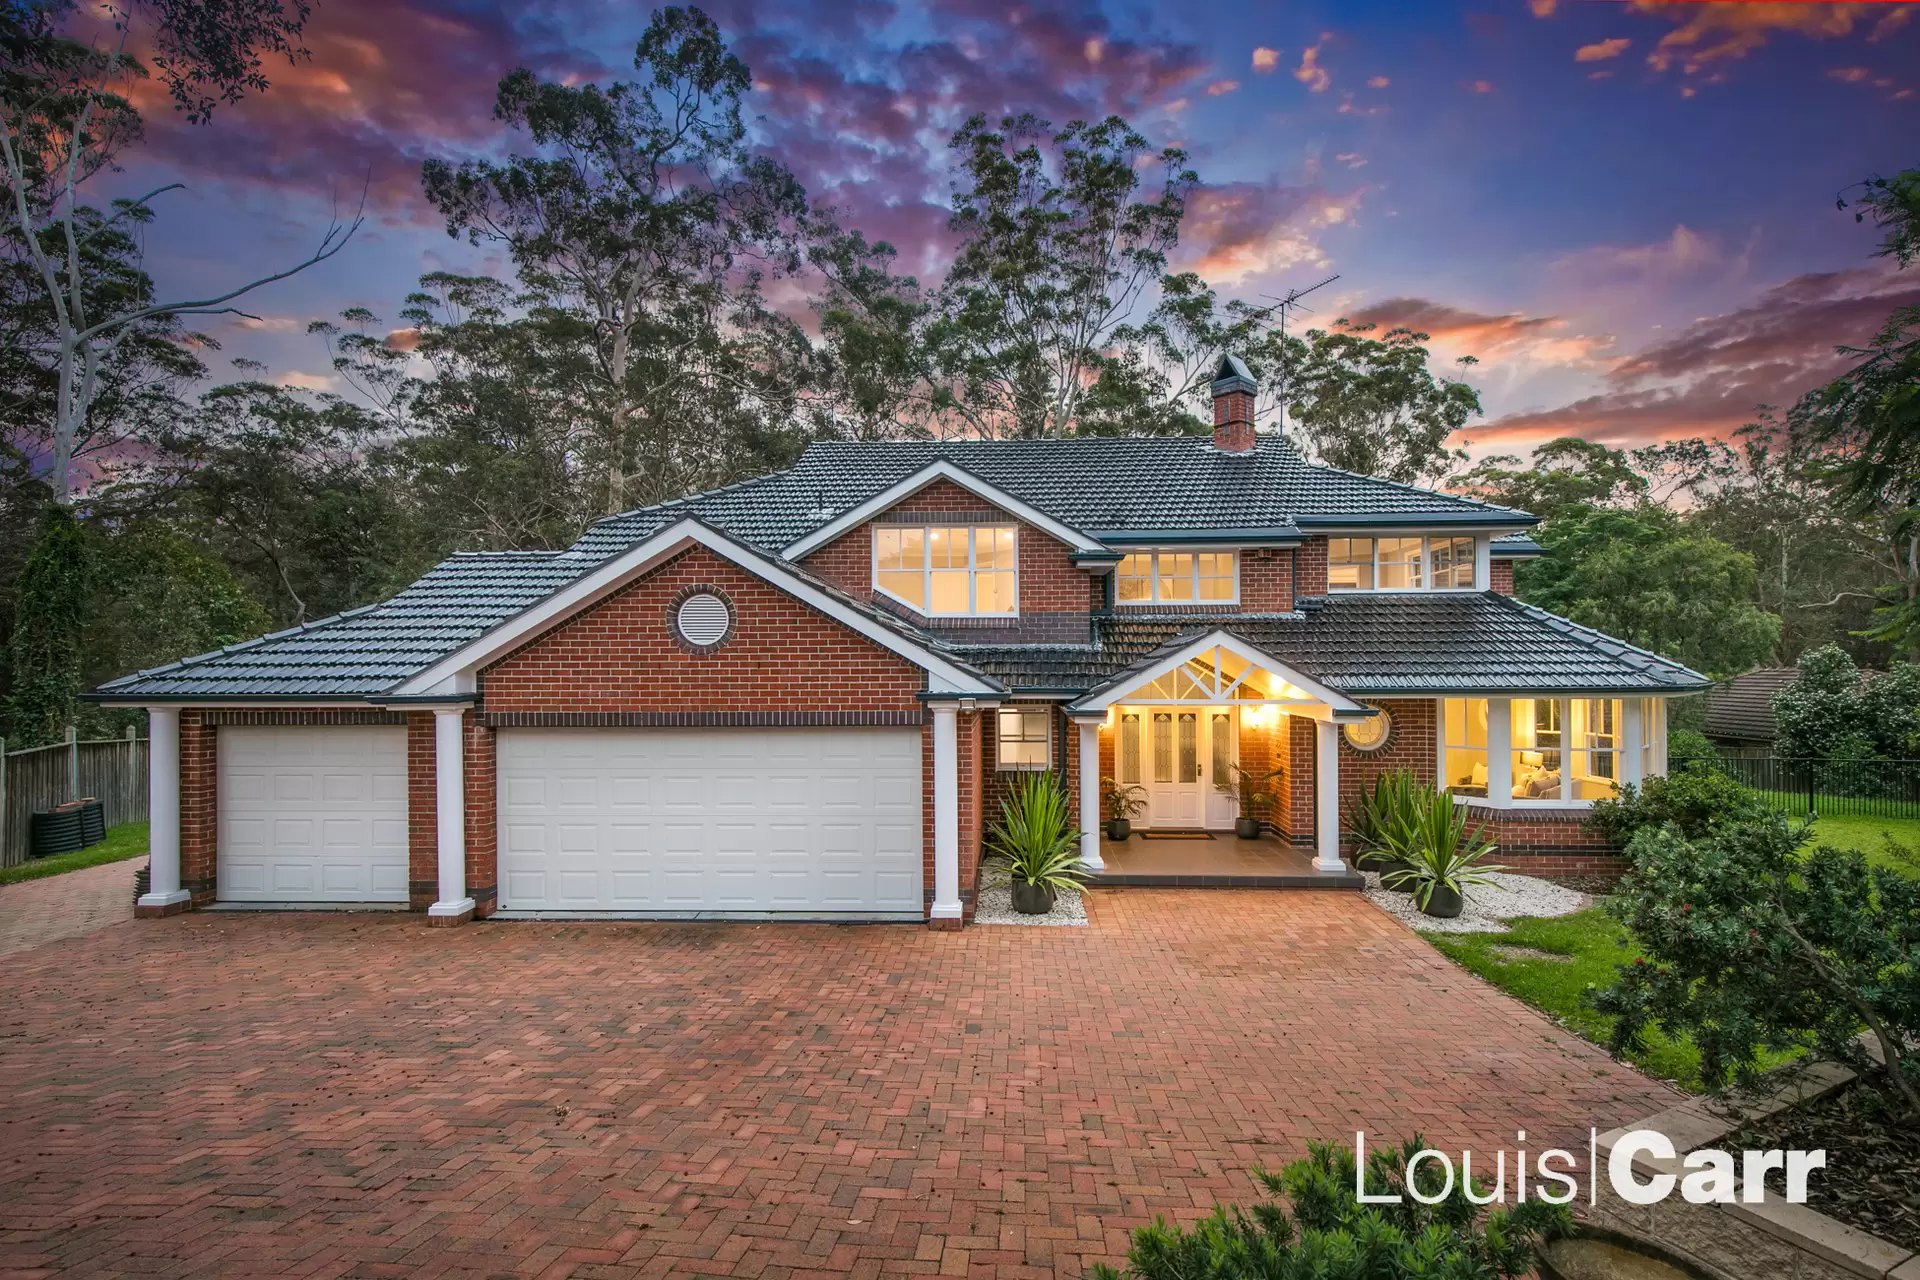 Photo #1: 22 Willowleaf Place, West Pennant Hills - For Sale by Louis Carr Real Estate